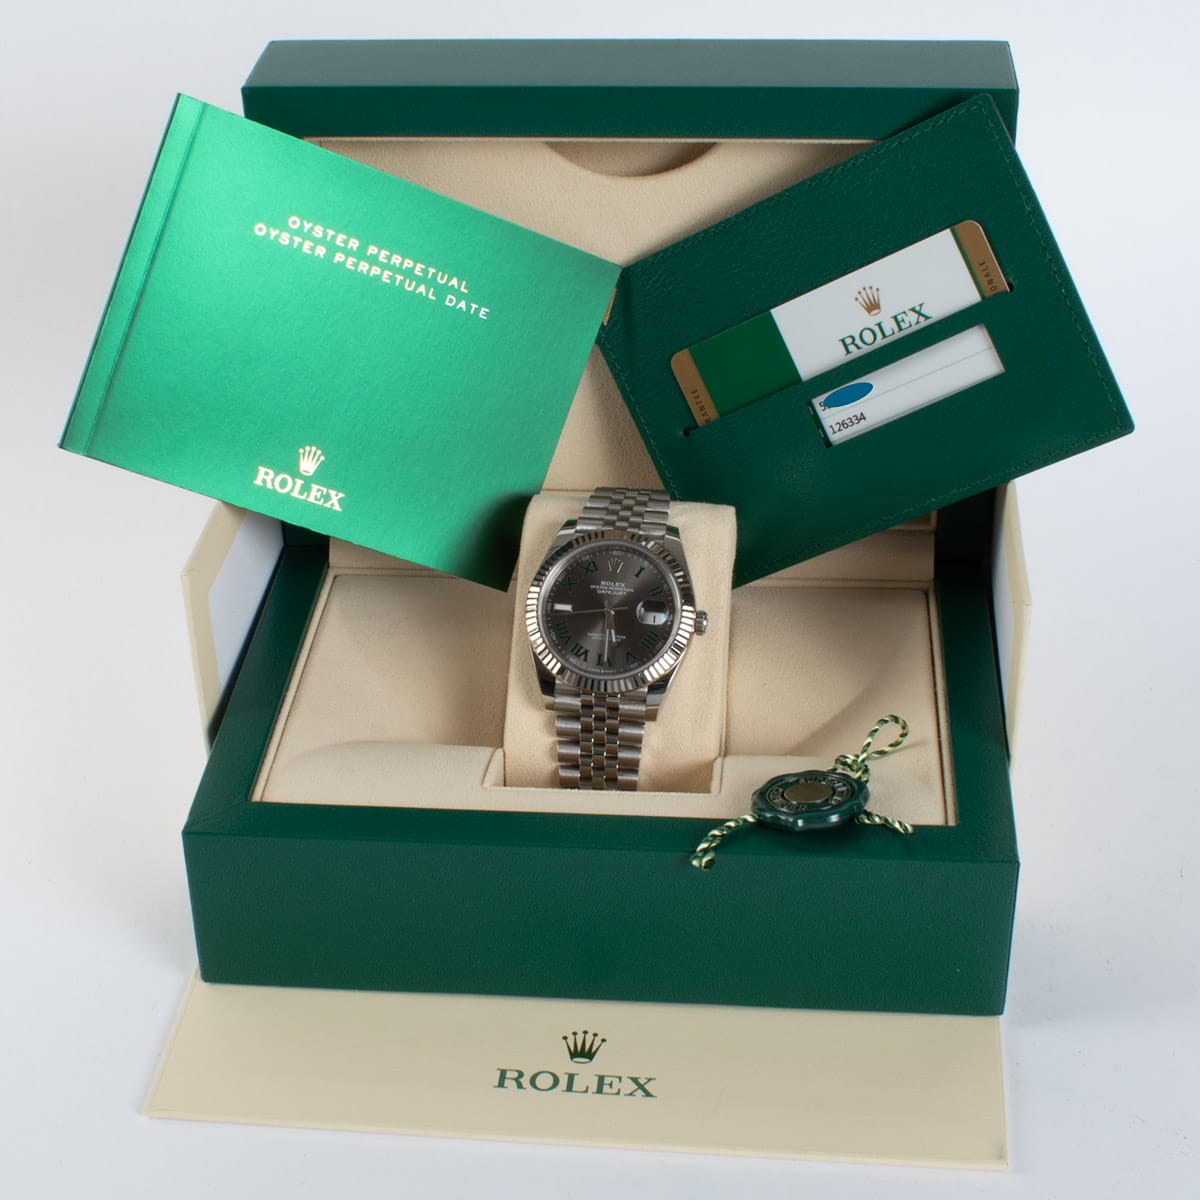 View in Box of Datejust 41